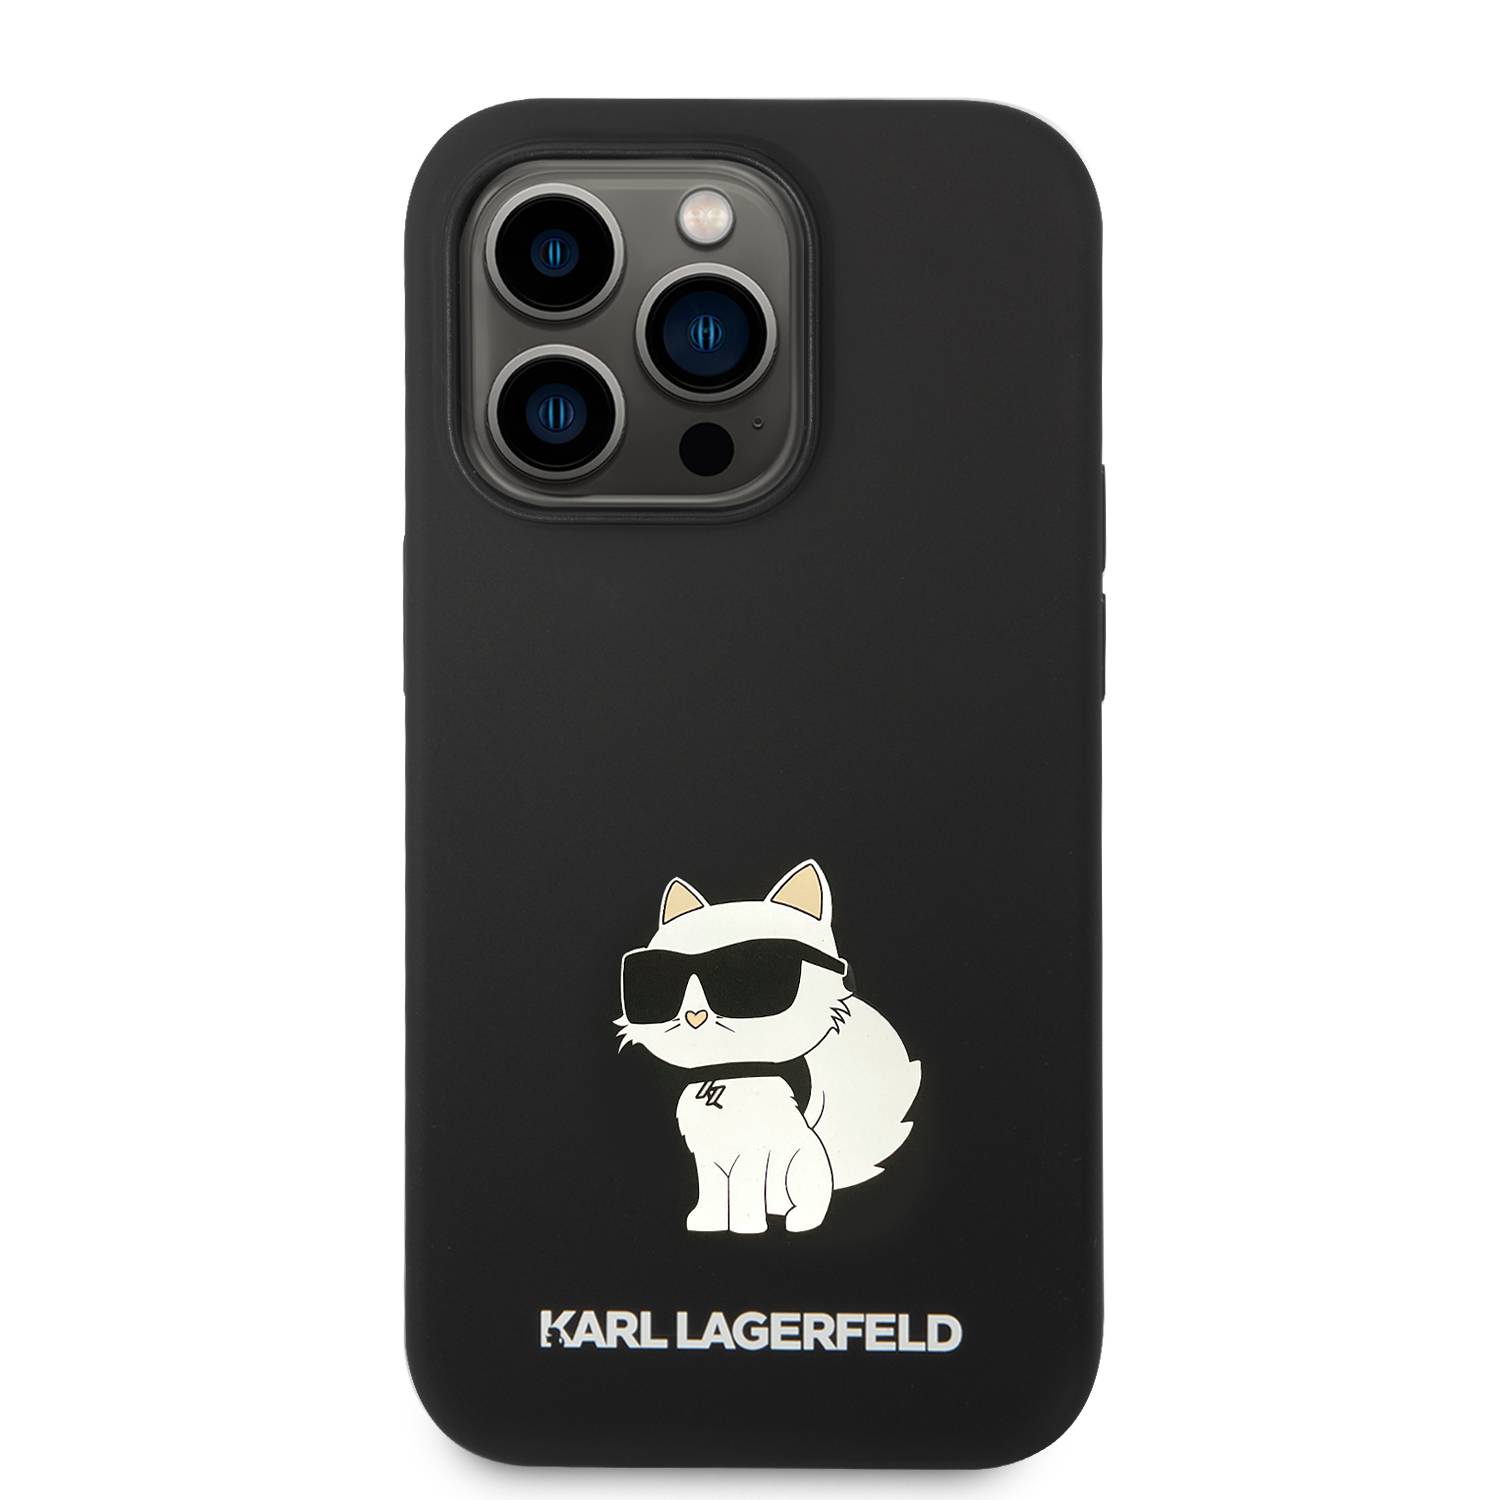 images/stories/virtuemart/product/Karl_Lagerfeld_Liquid_Silicone_Case_Choupette_NFT_Logo_iPhone_14_Promax_2__1671638619_208